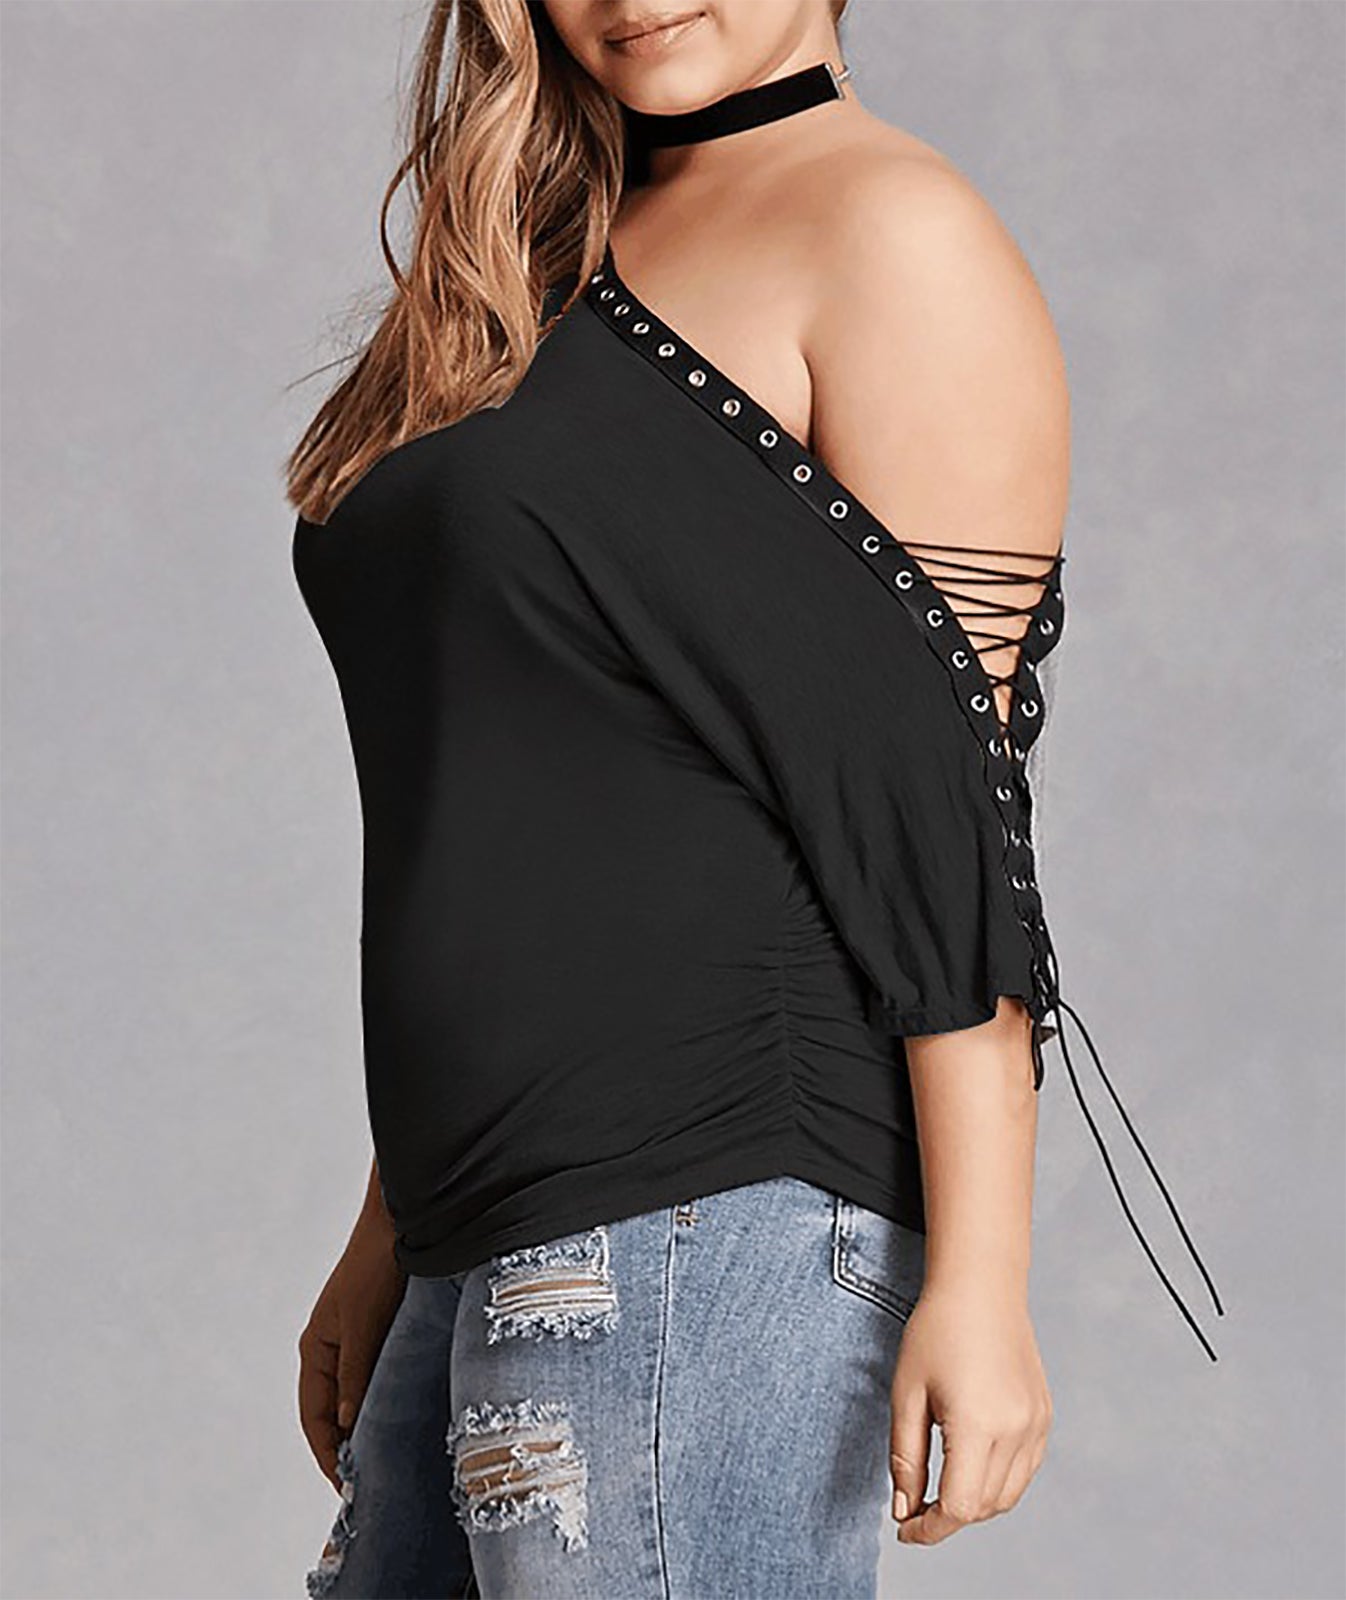 (Buy 1 Get 1 FREE) Plus Size Off Shoulder Top + Plus Size Lingerie (Pack of 2)